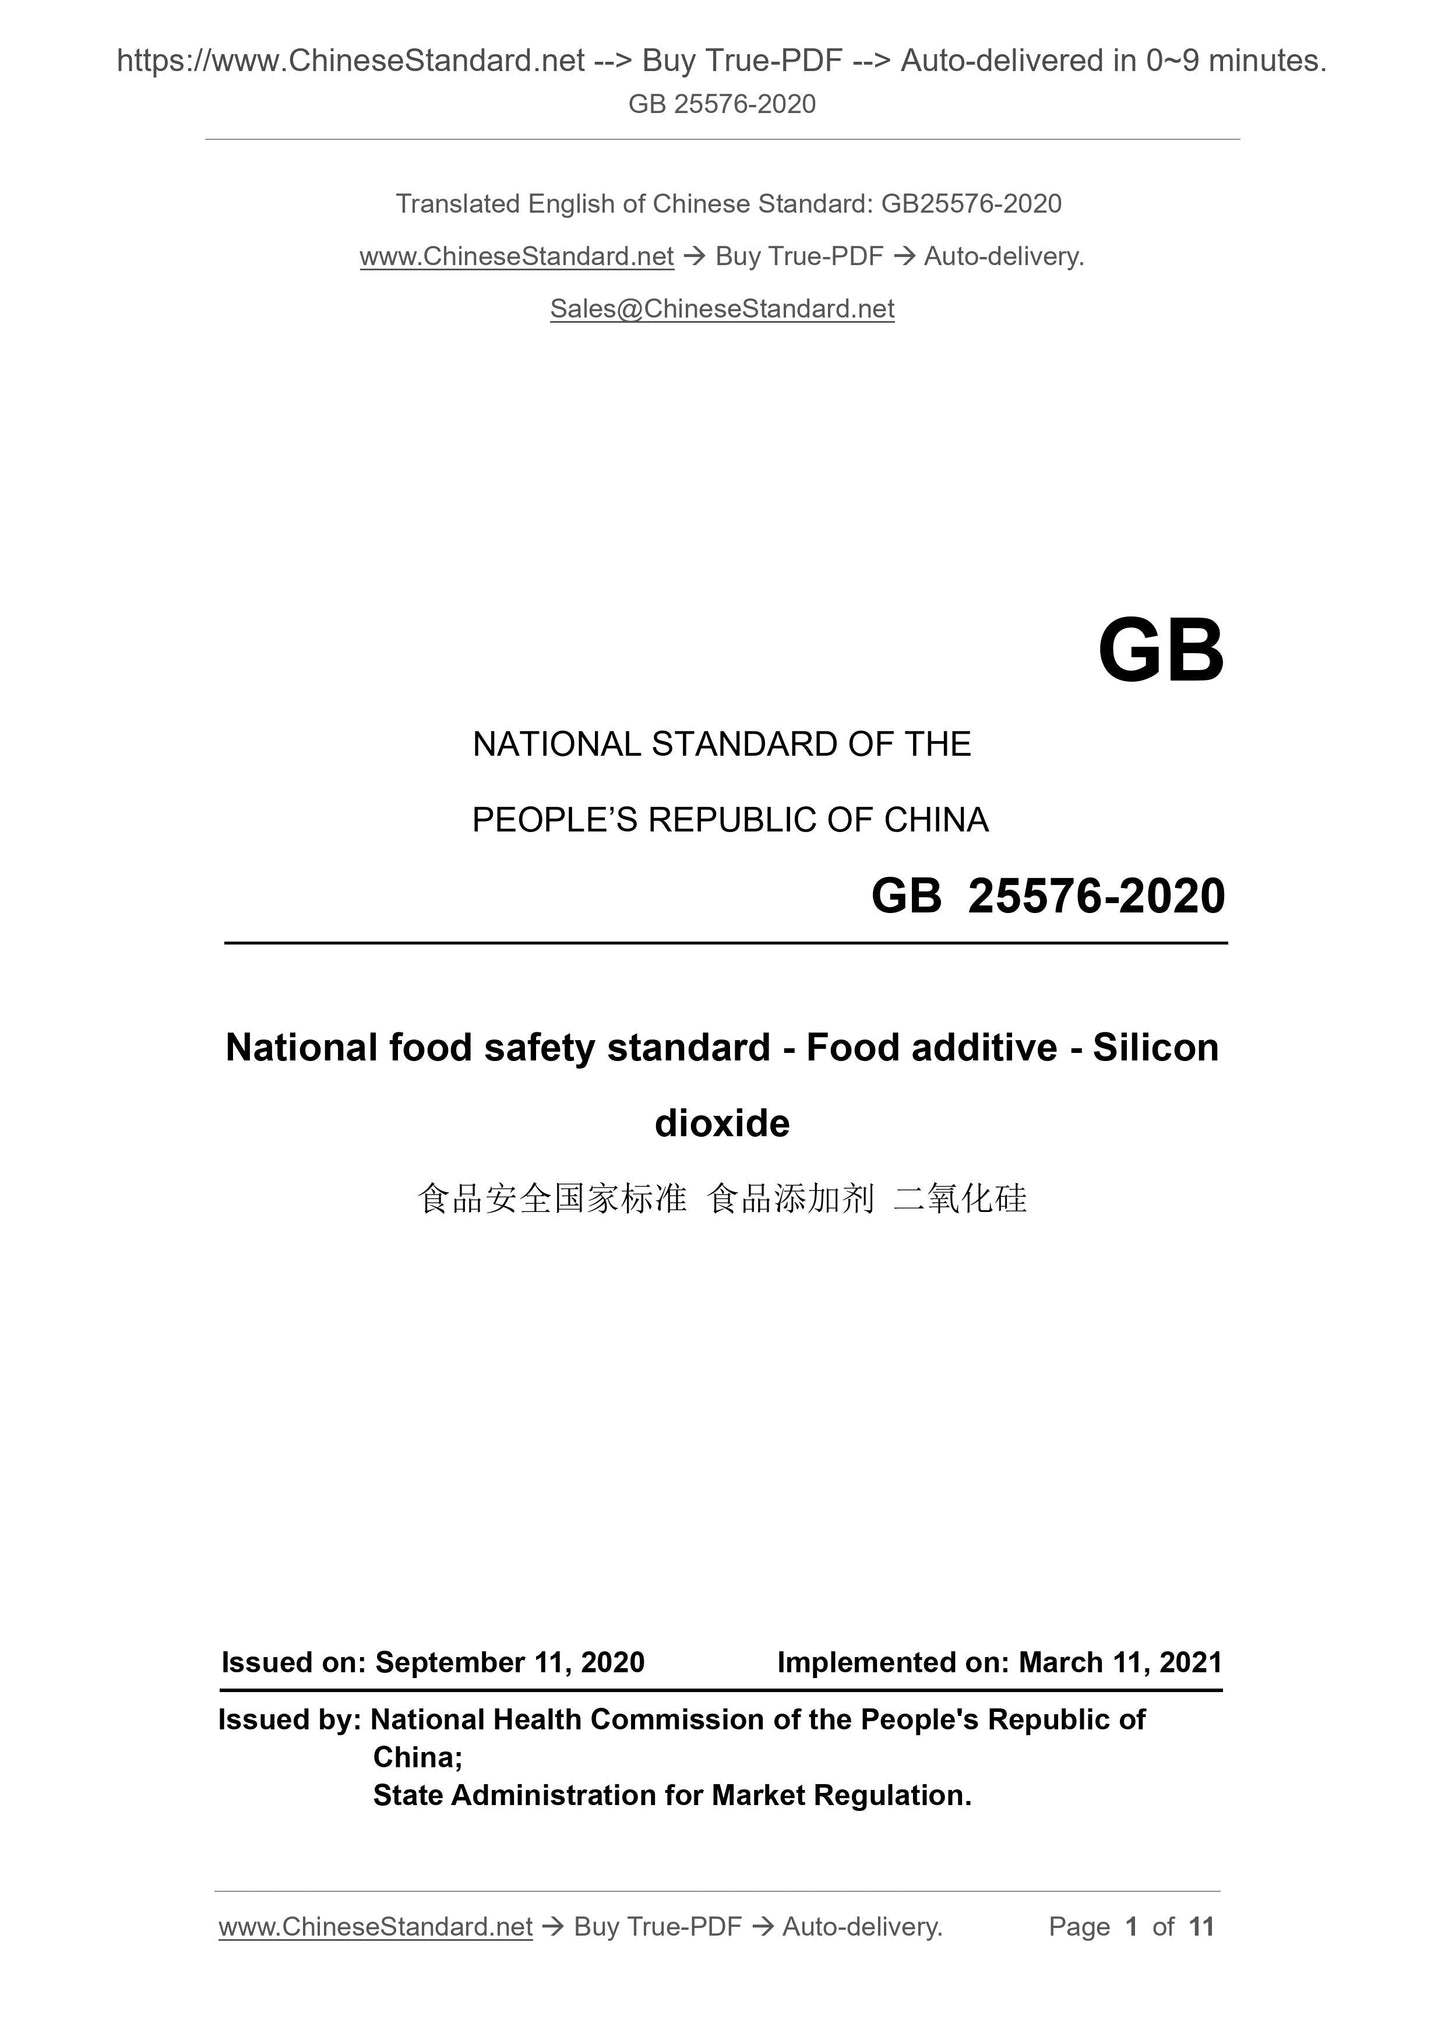 GB 25576-2020 Page 1